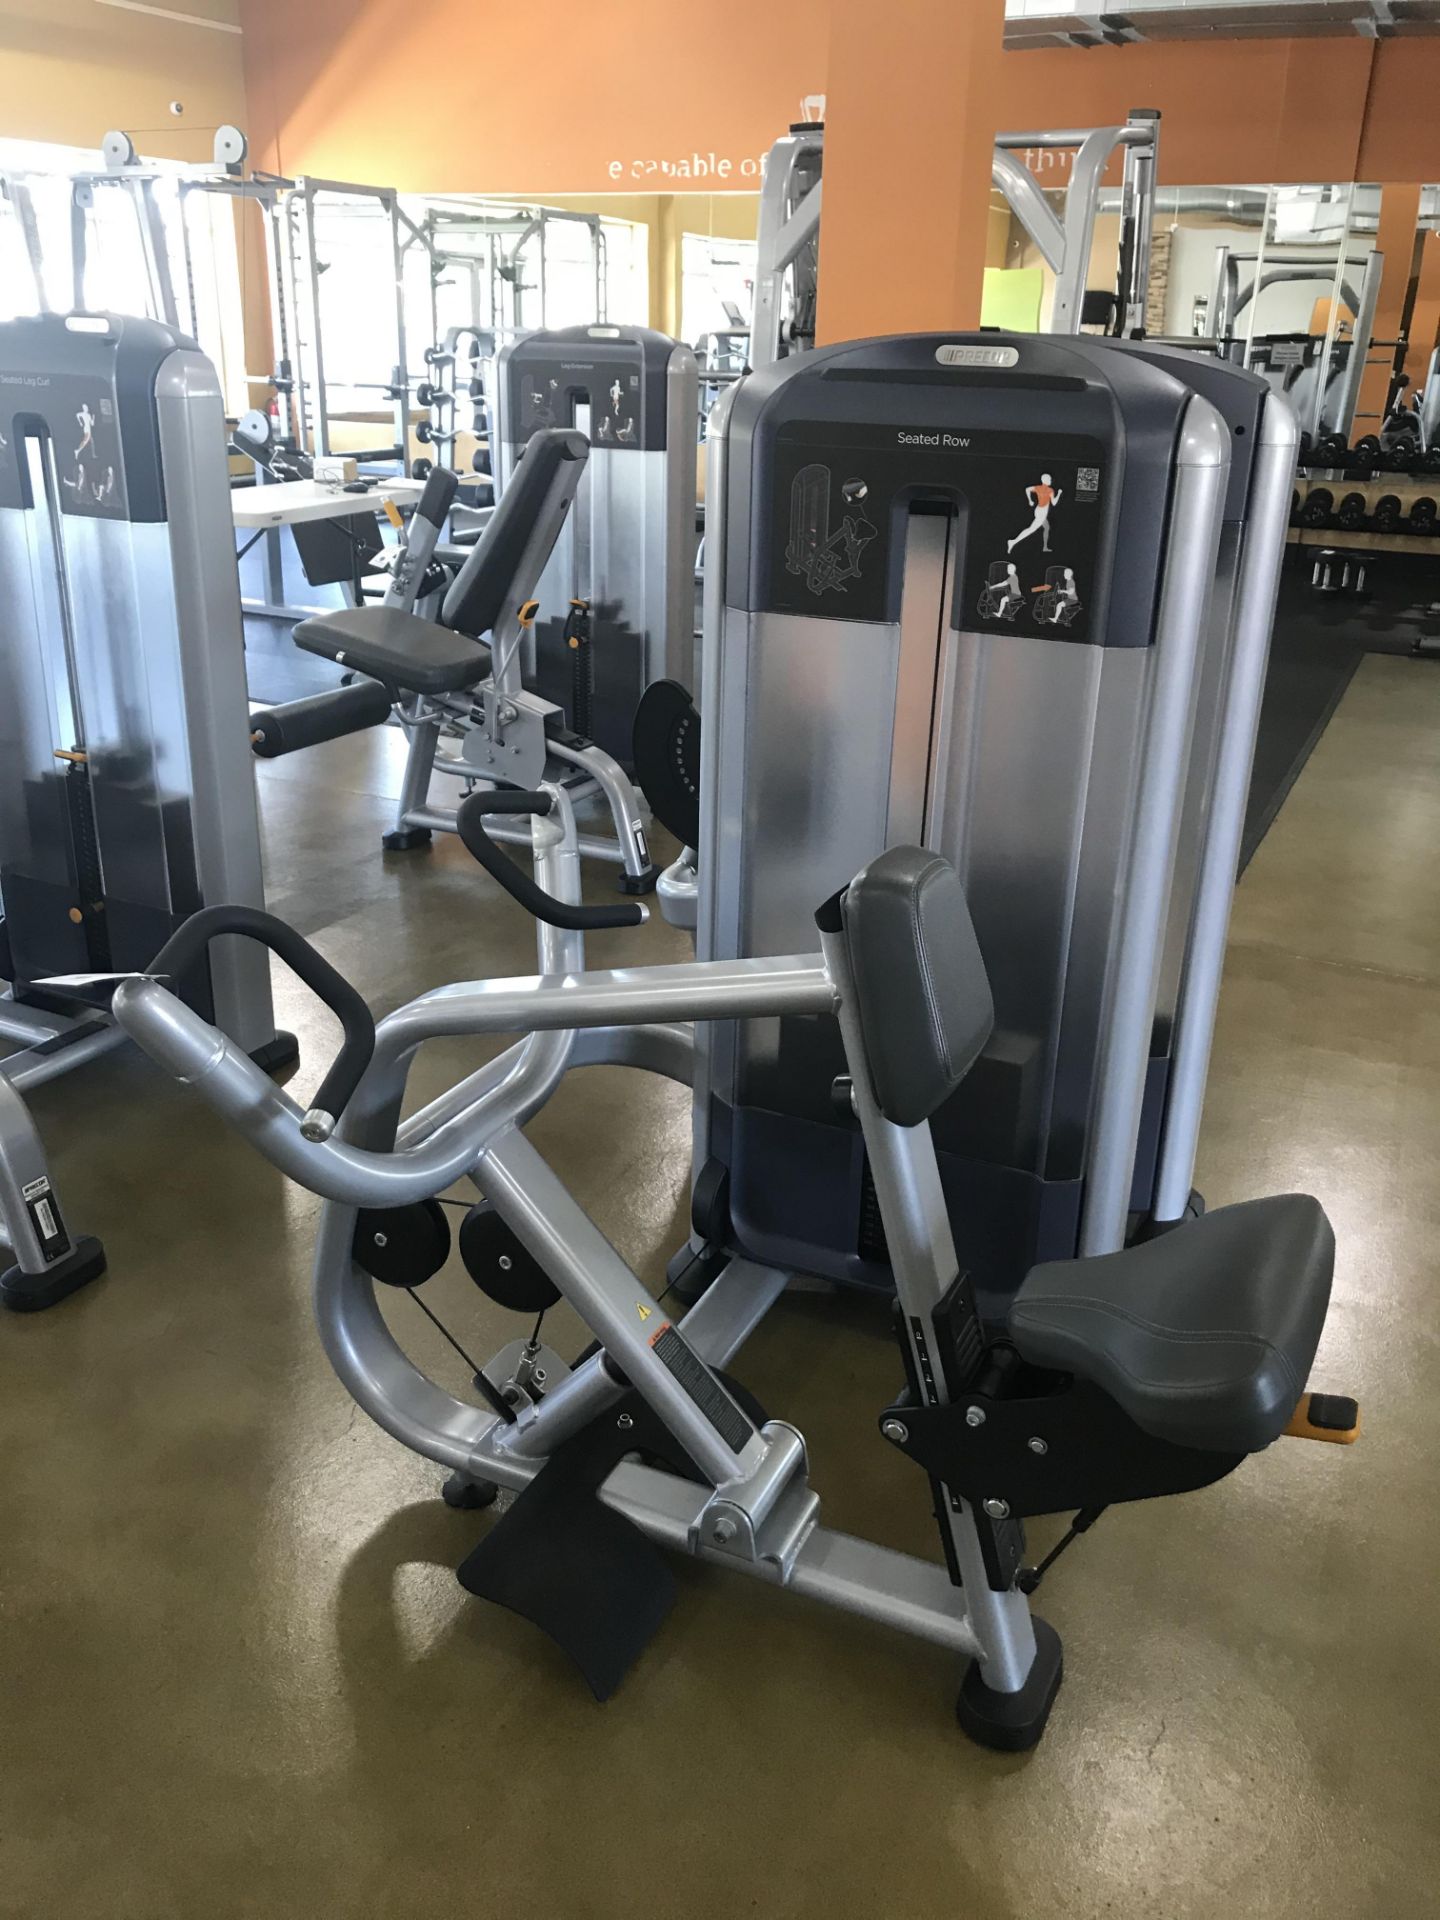 Precor Discovery Series Selectorized Line Seated Row Model DSL0310 S/N BA65D05160003